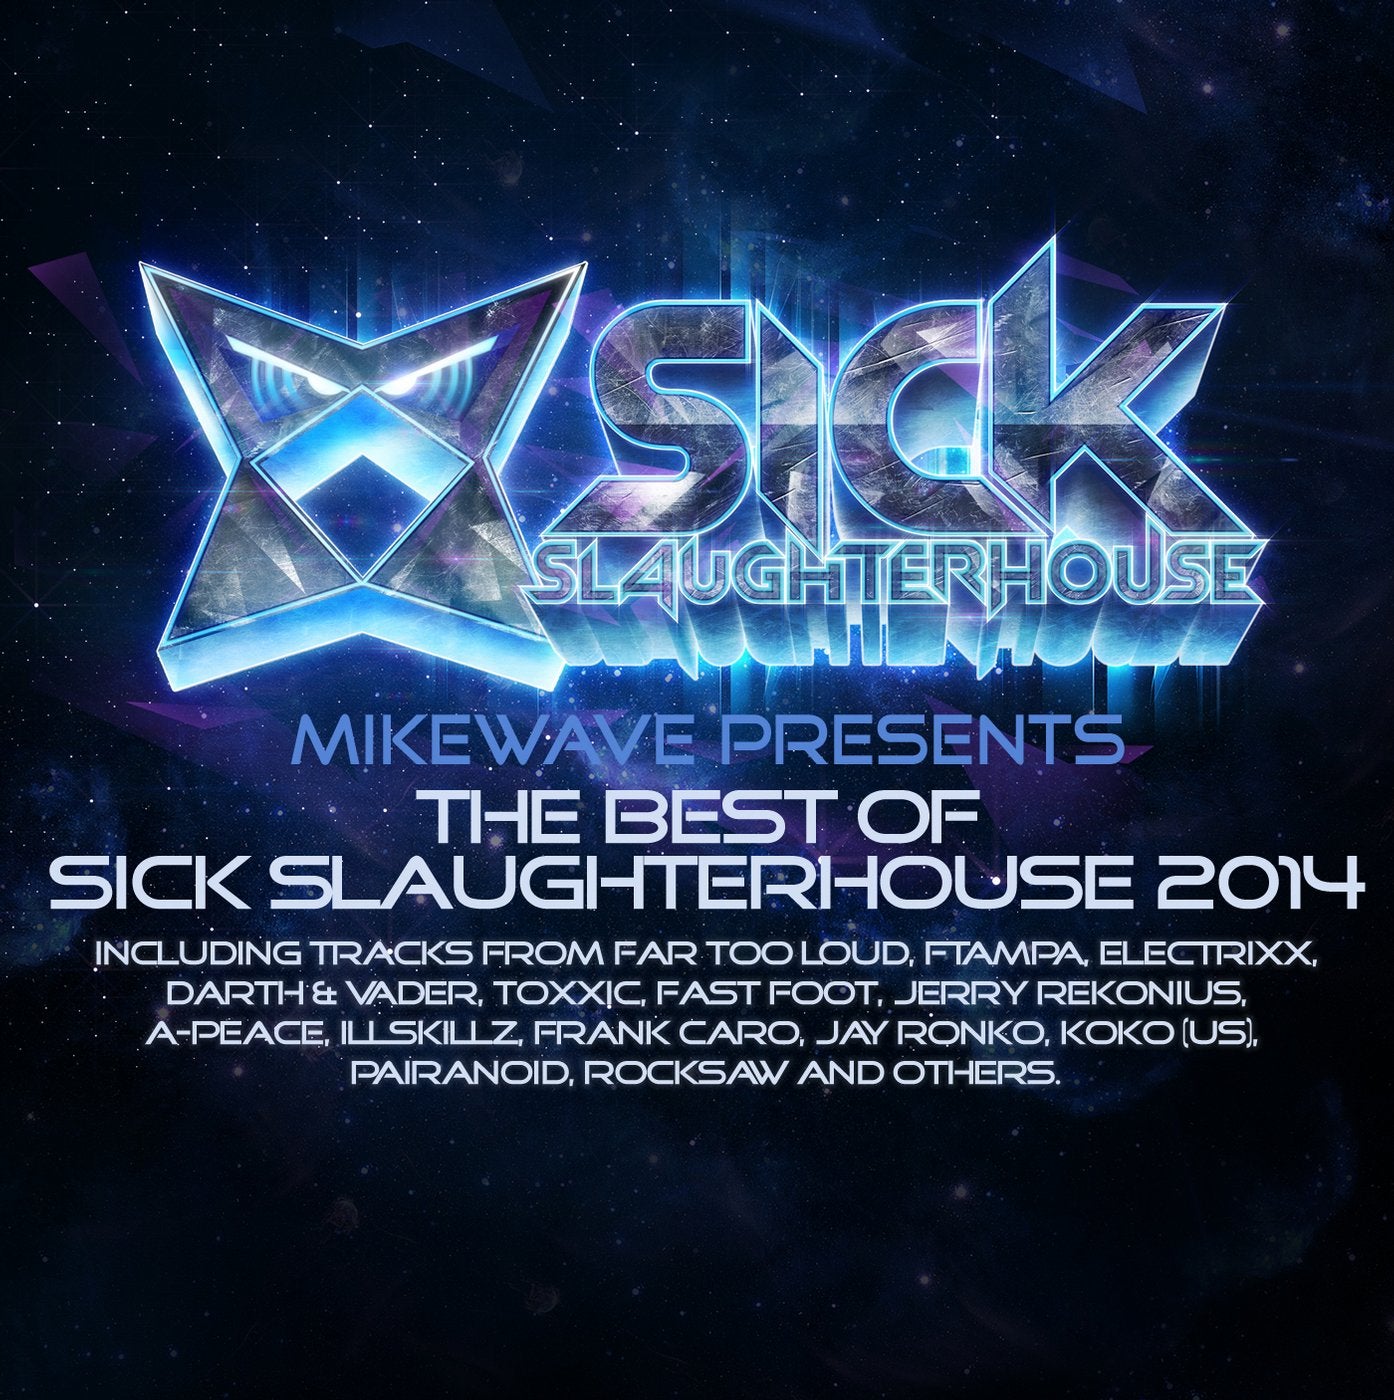 MikeWave Presents The Best Of Sick Slaughterhouse 2014